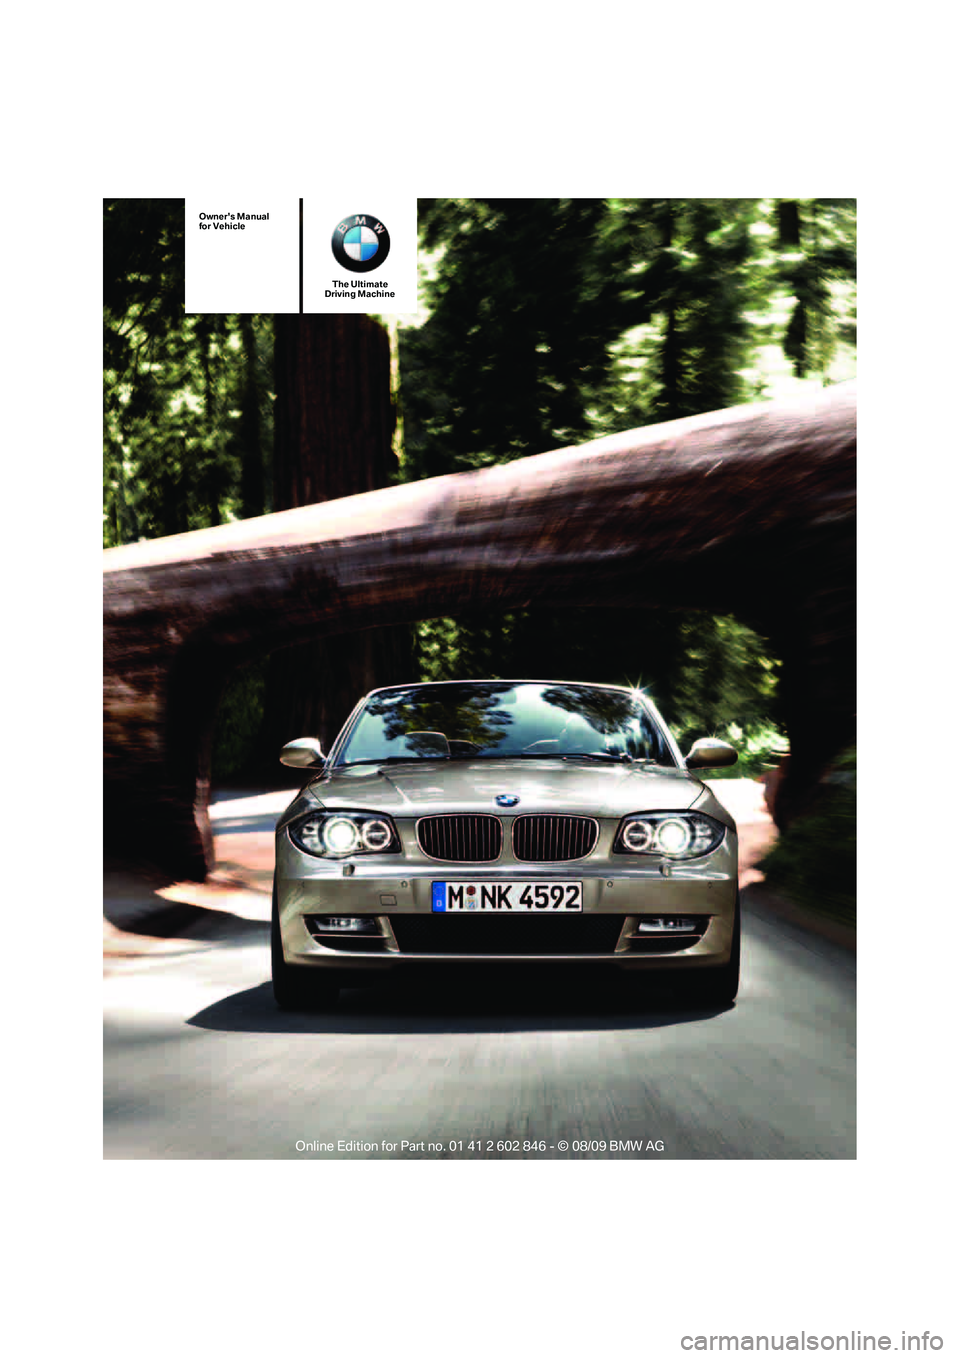 BMW 135I COUPE 2010  Owners Manual The Ultimate
Driving Machine
Owners Manual
for Vehicle 